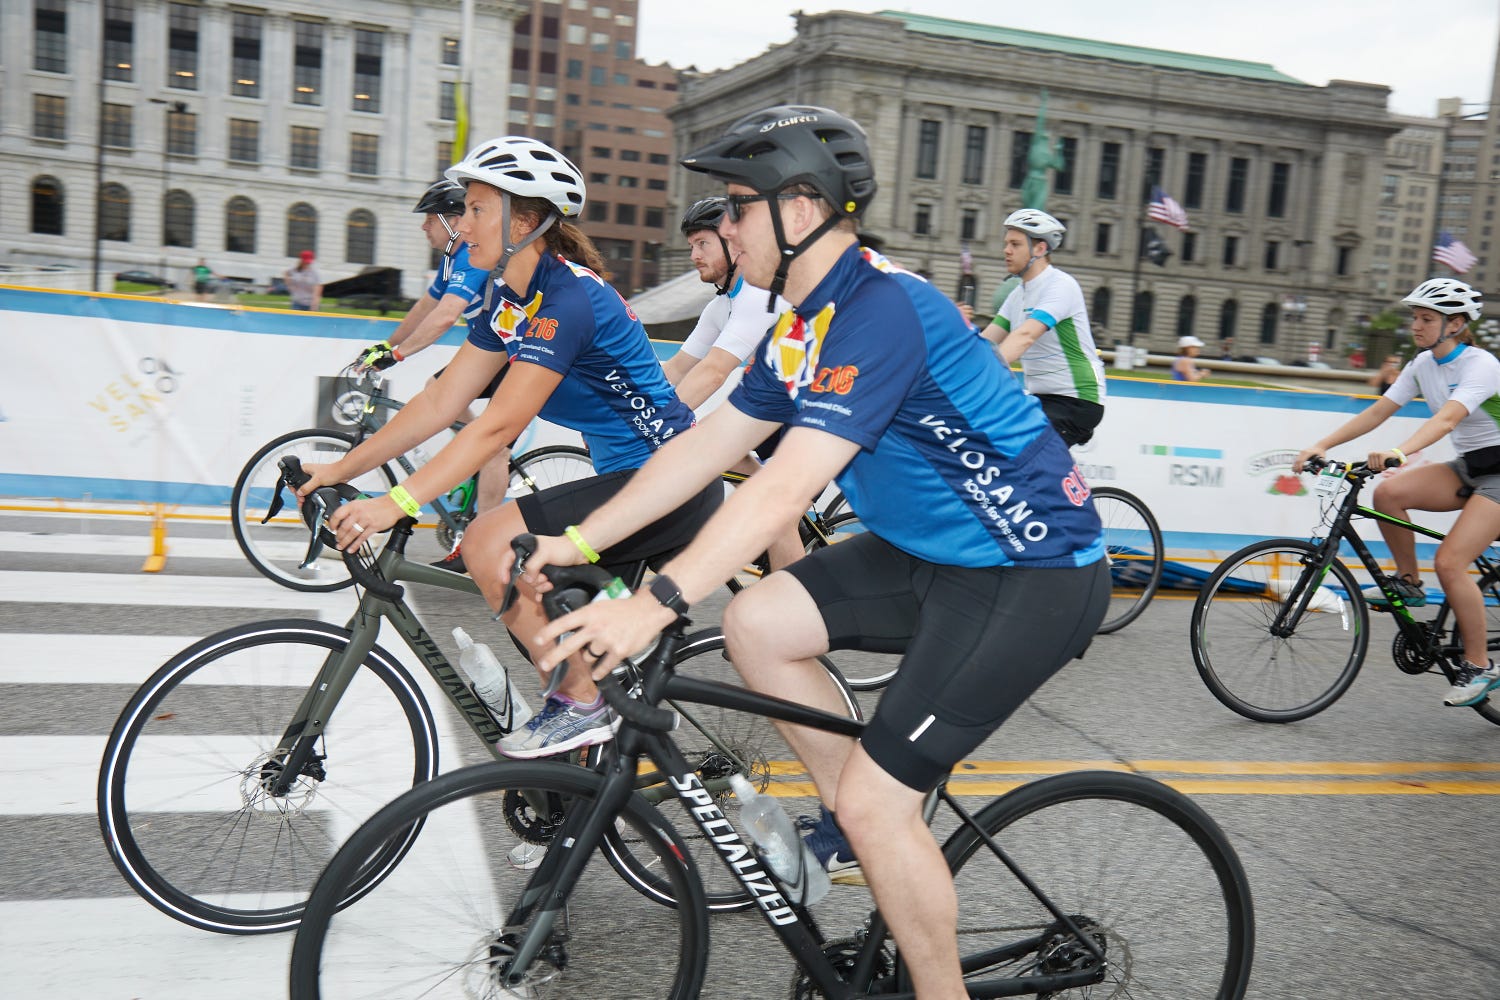 Join the Cleveland Indians 2020 VeloSano “Bike to Cure” Team